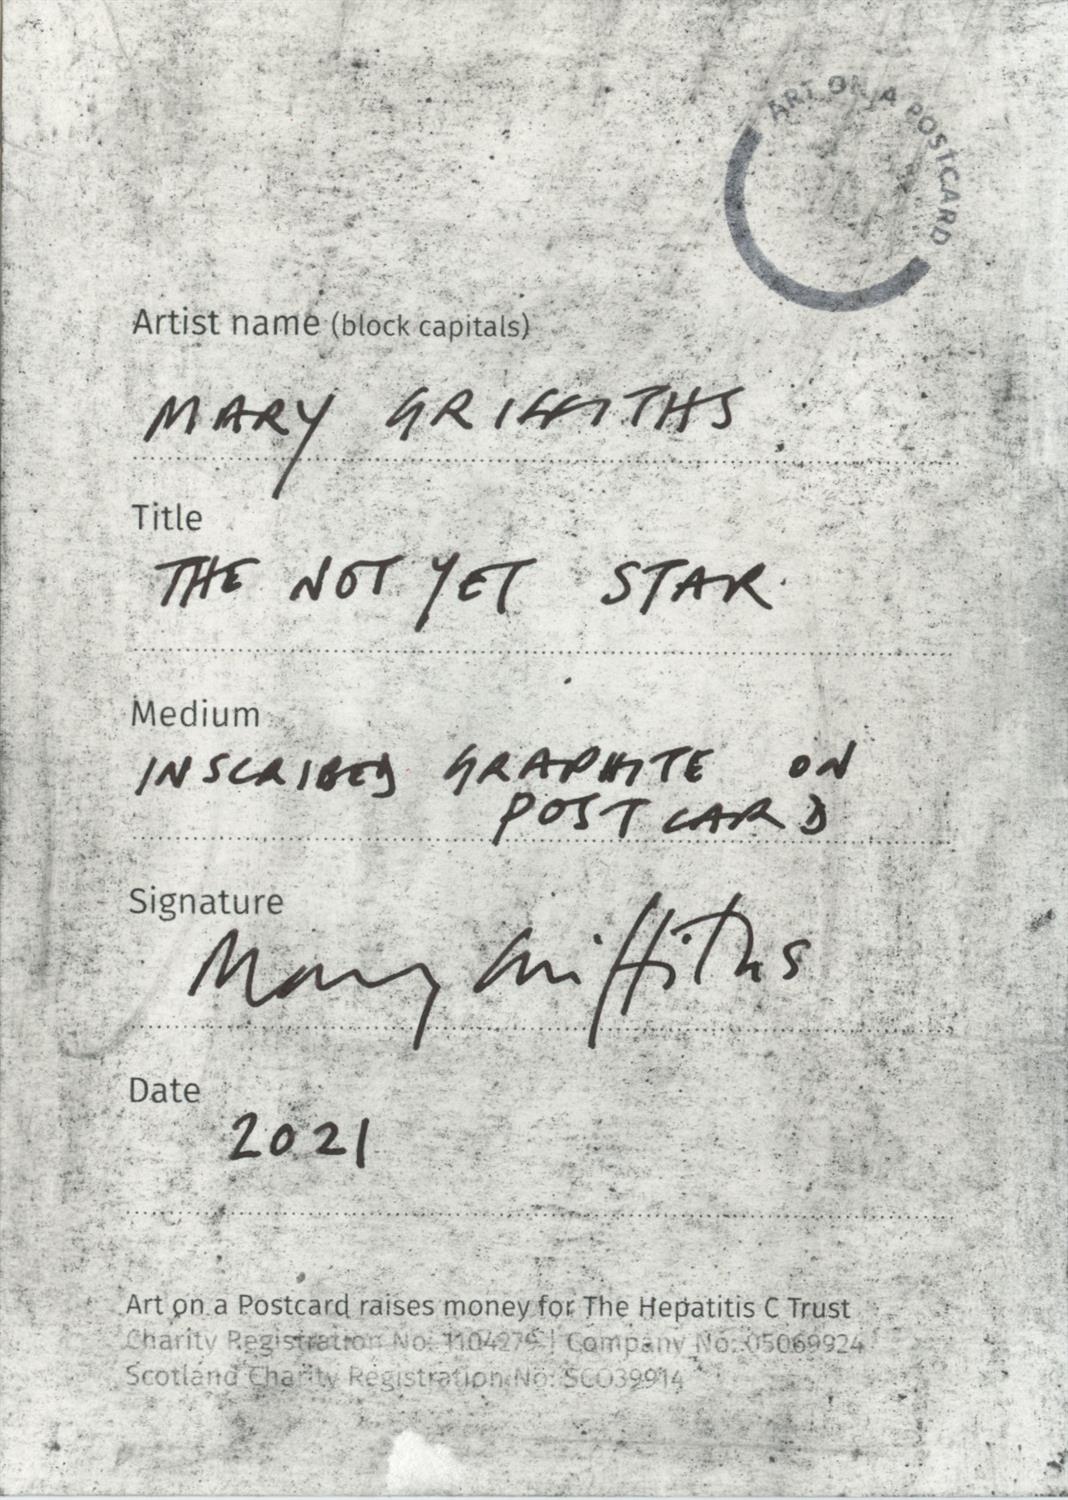 Mary Griffiths, The Not Yet Star, 2021 - Image 2 of 3